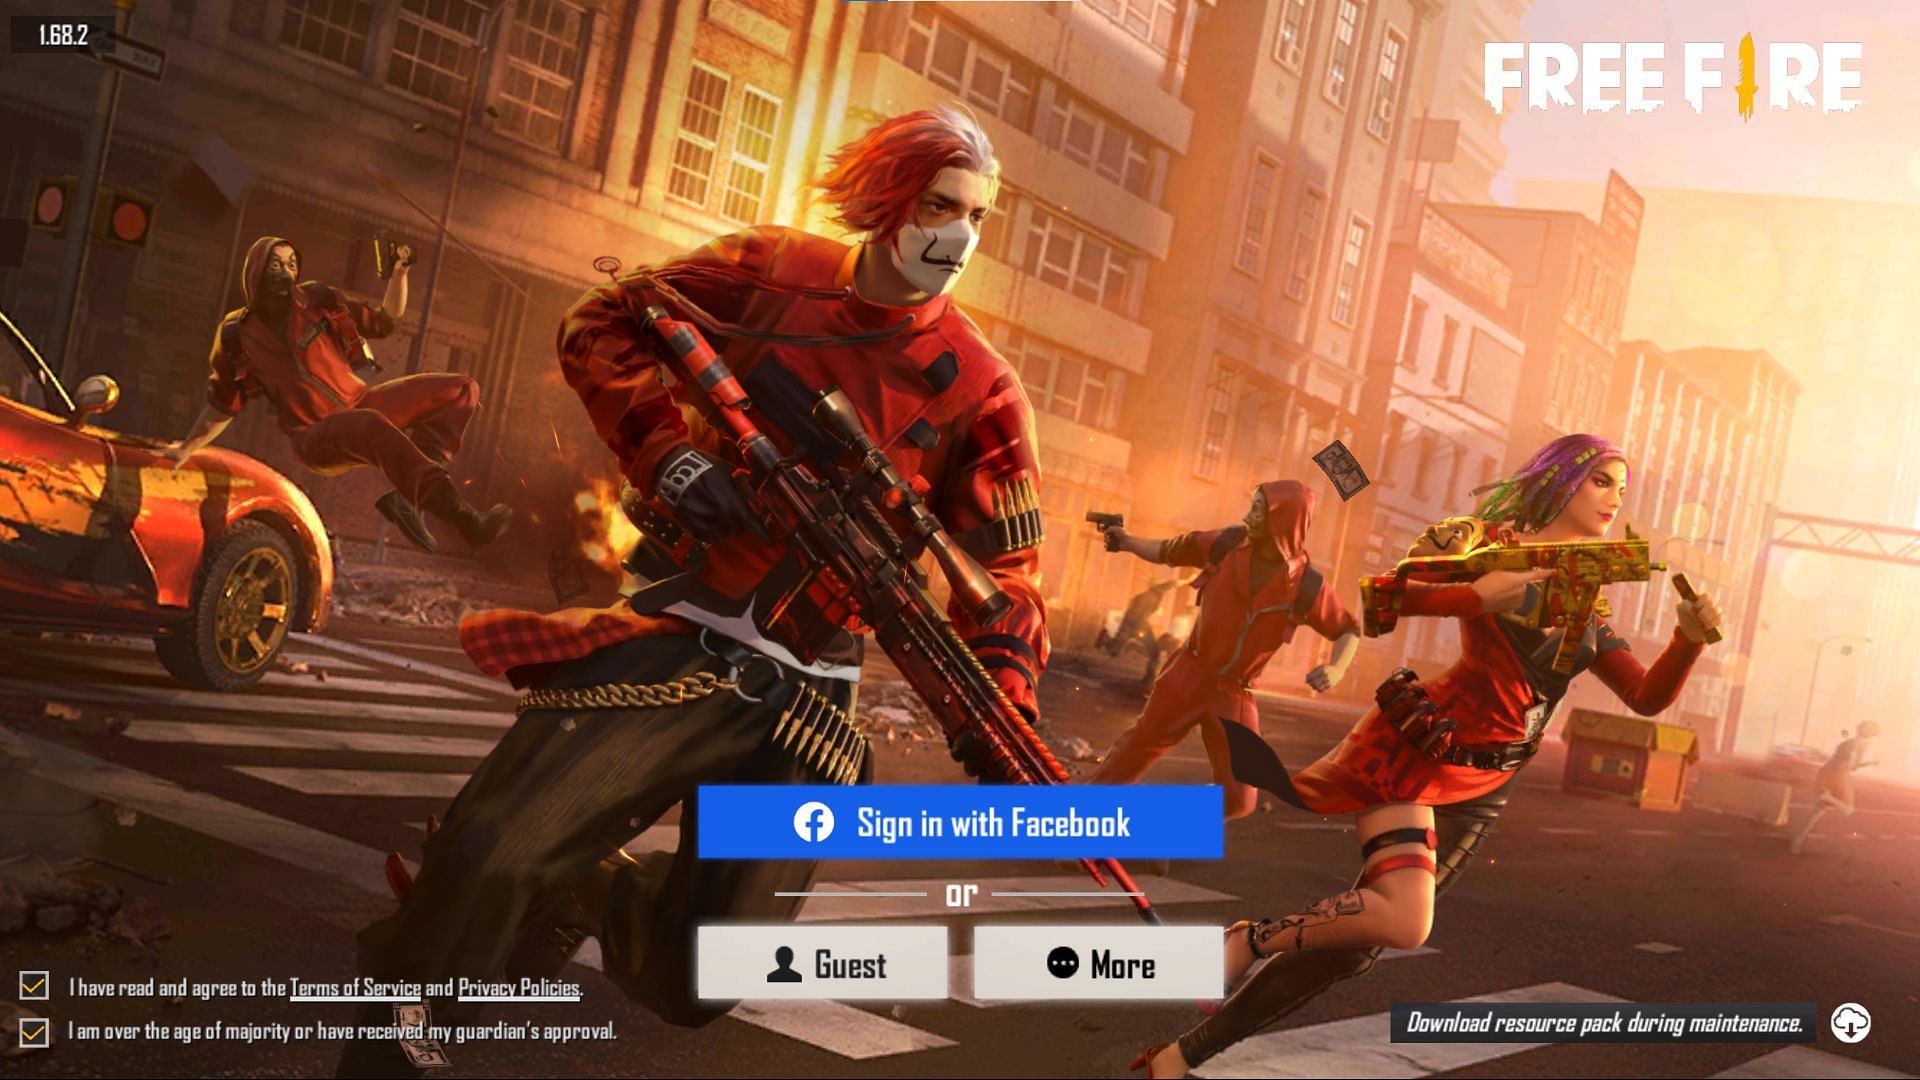 Users can access the game after maintenance (Image via Free FIre)